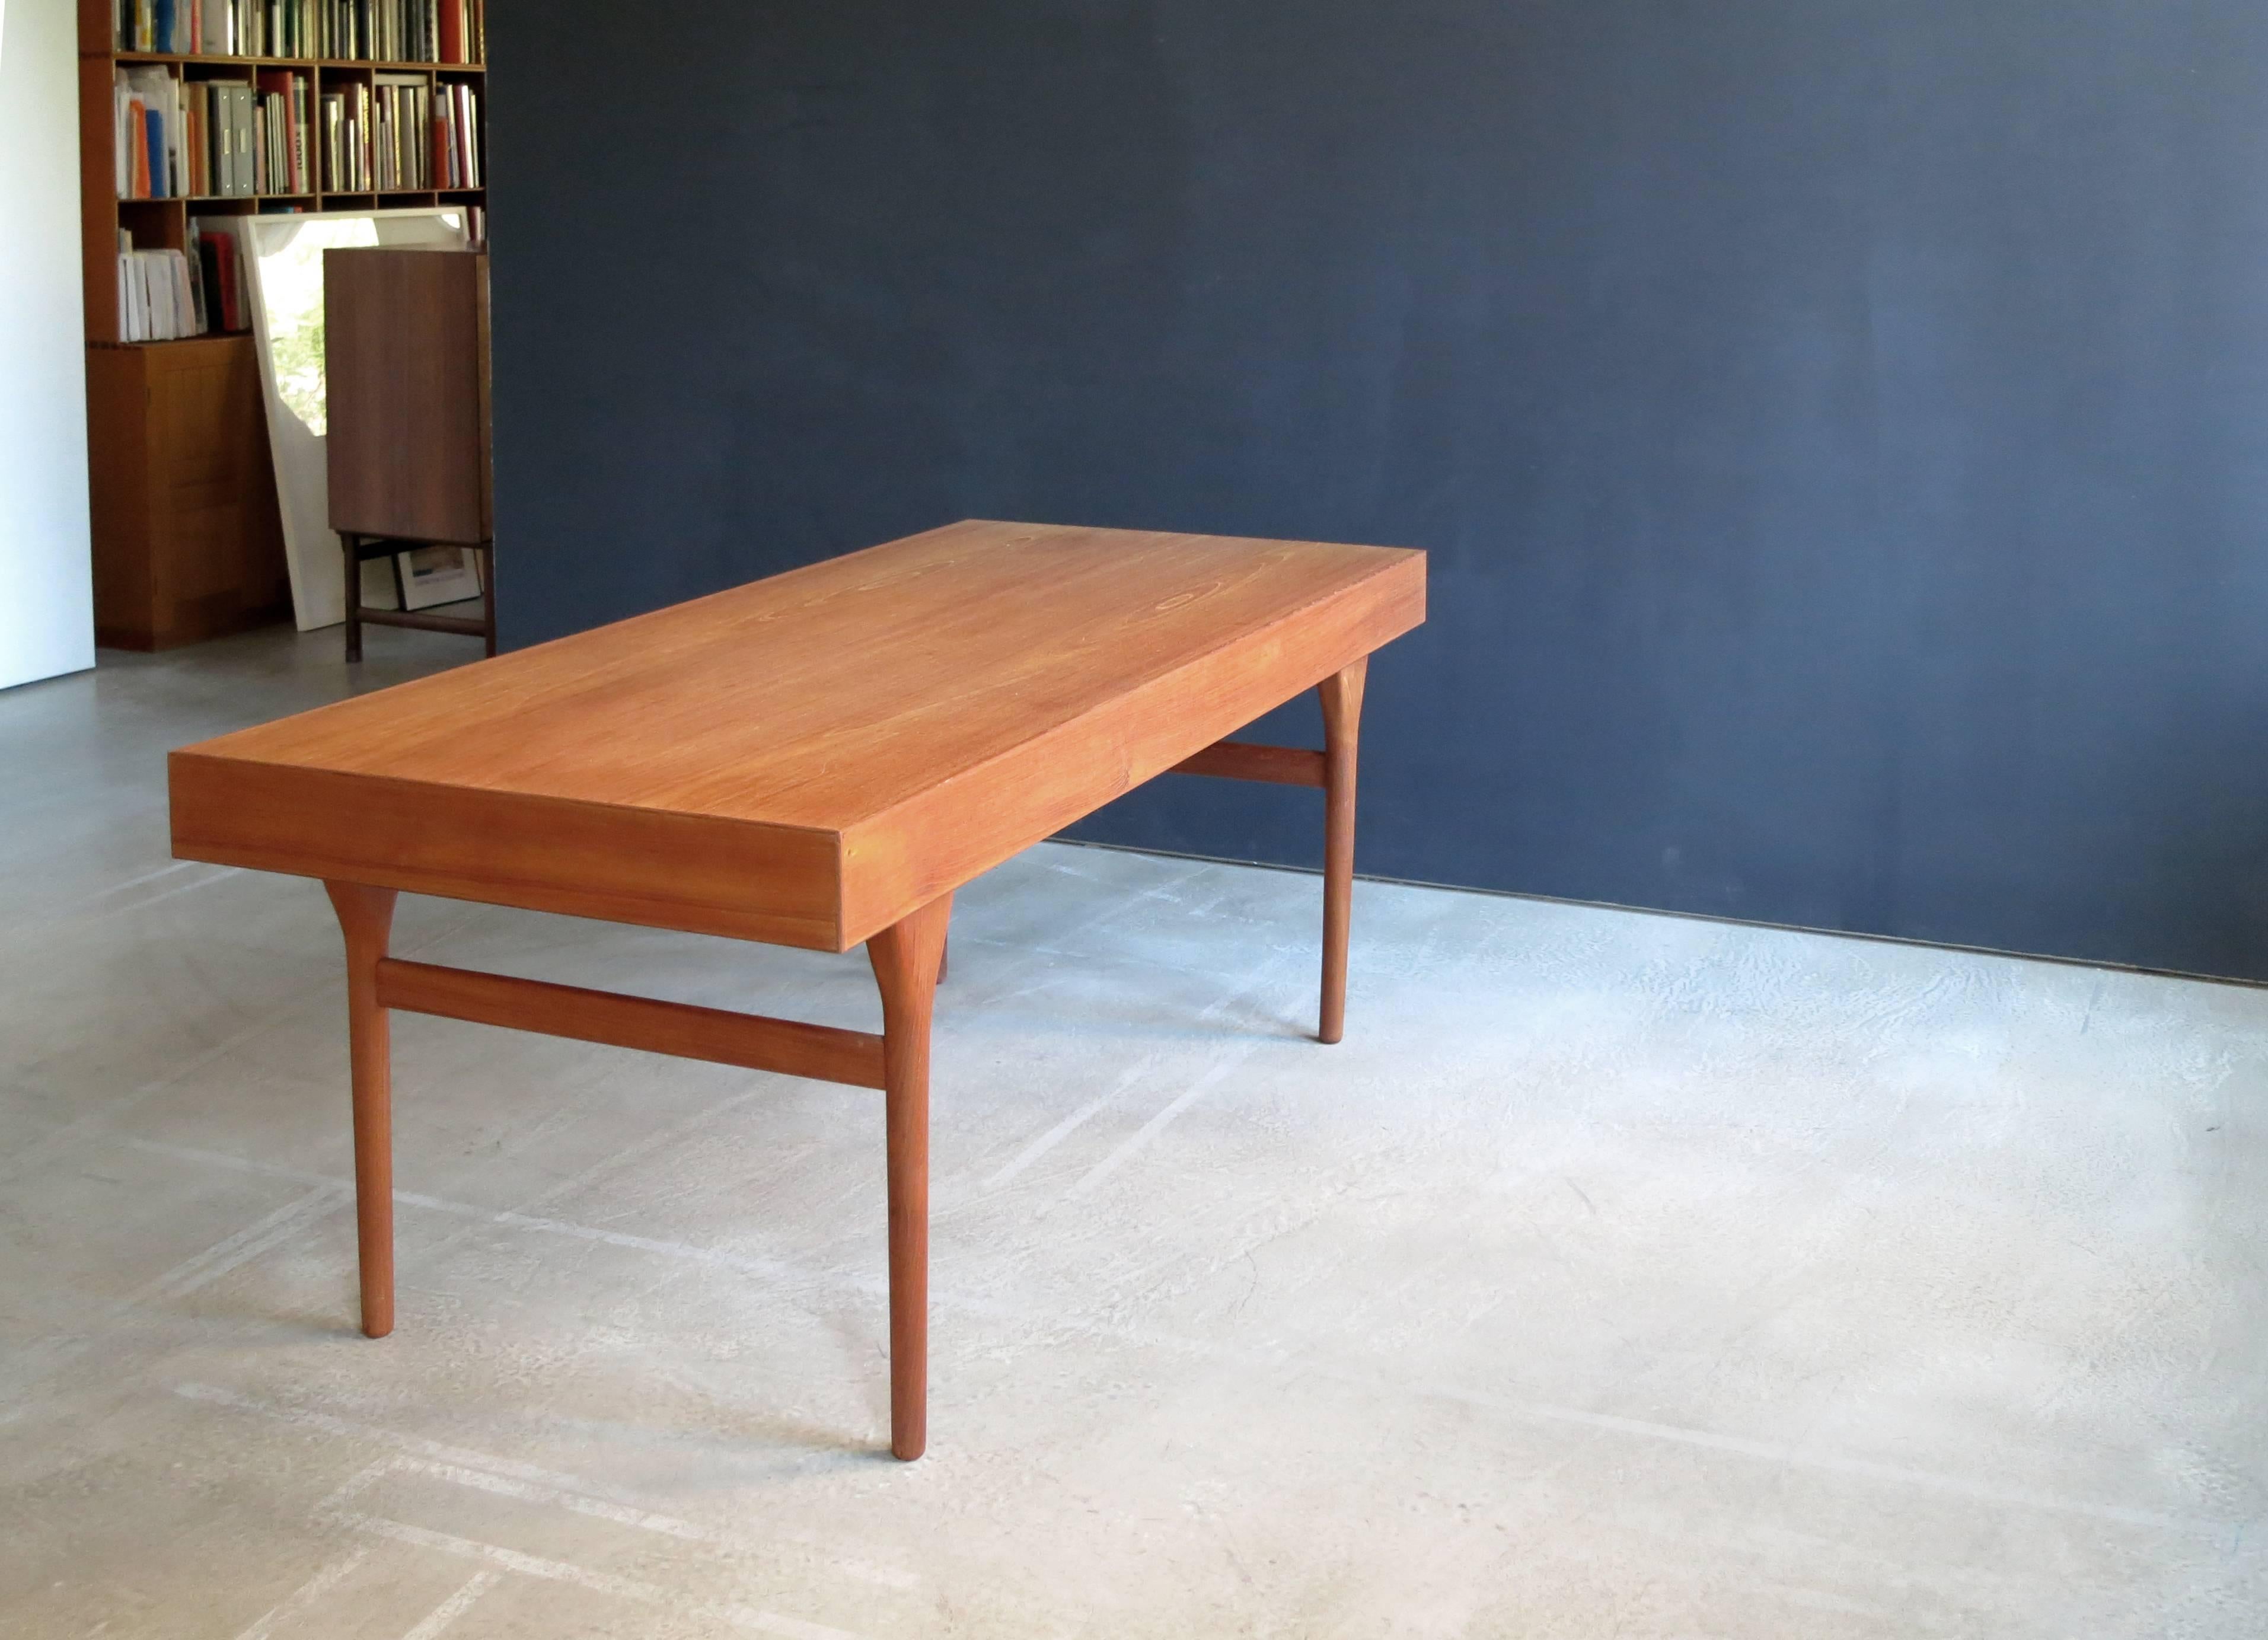 Mid-20th Century Modernist Freestanding Teak Desk with Four Drawers by Nanna and Jørgen Ditzel For Sale